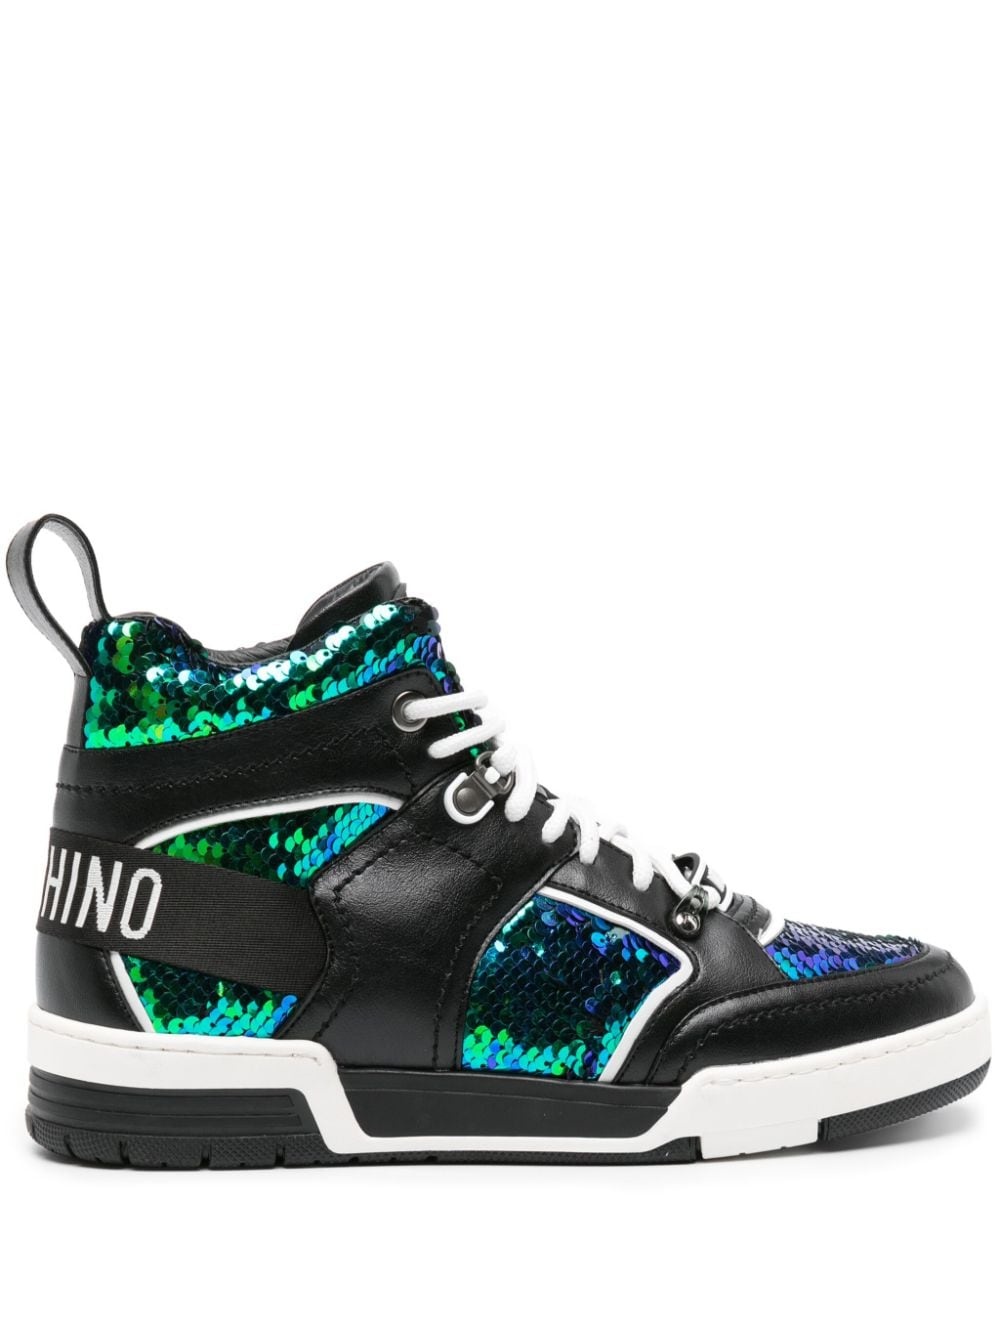 sequin-embellished high-top sneakers - 1